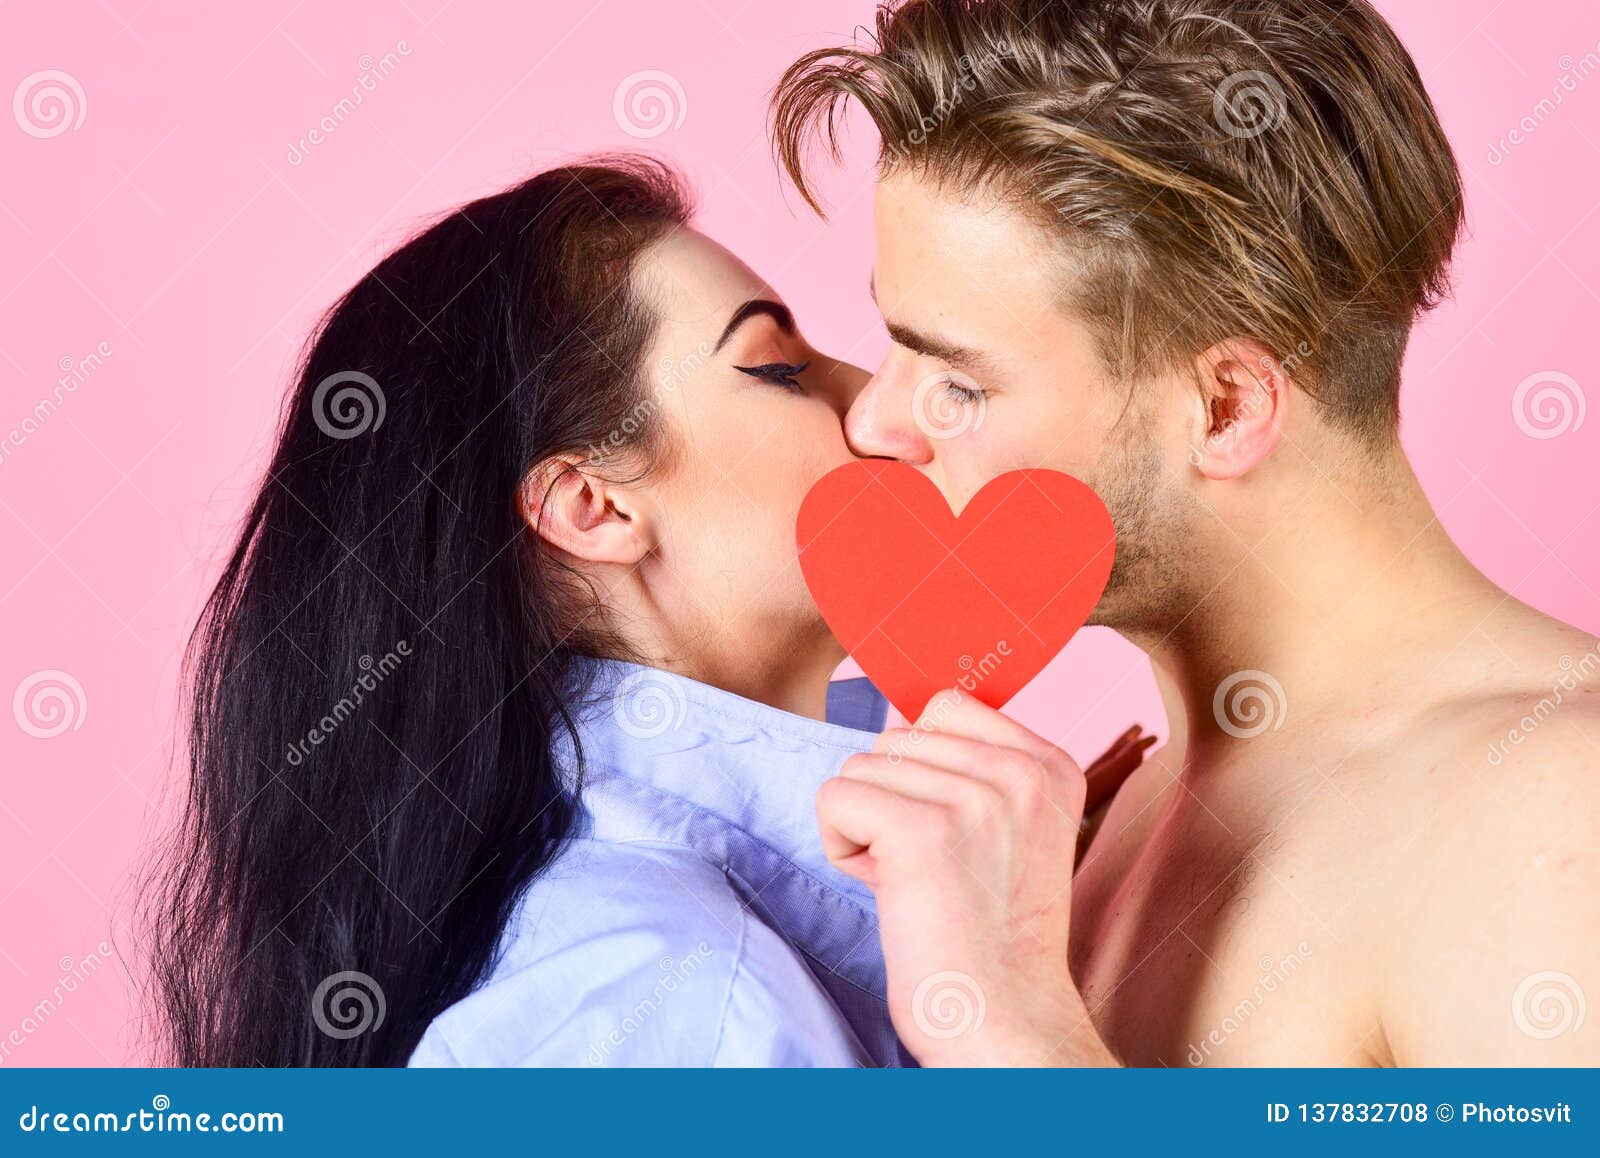 Outstanding Collection of Full 4K Romantic Kiss Day Images – Top 999+